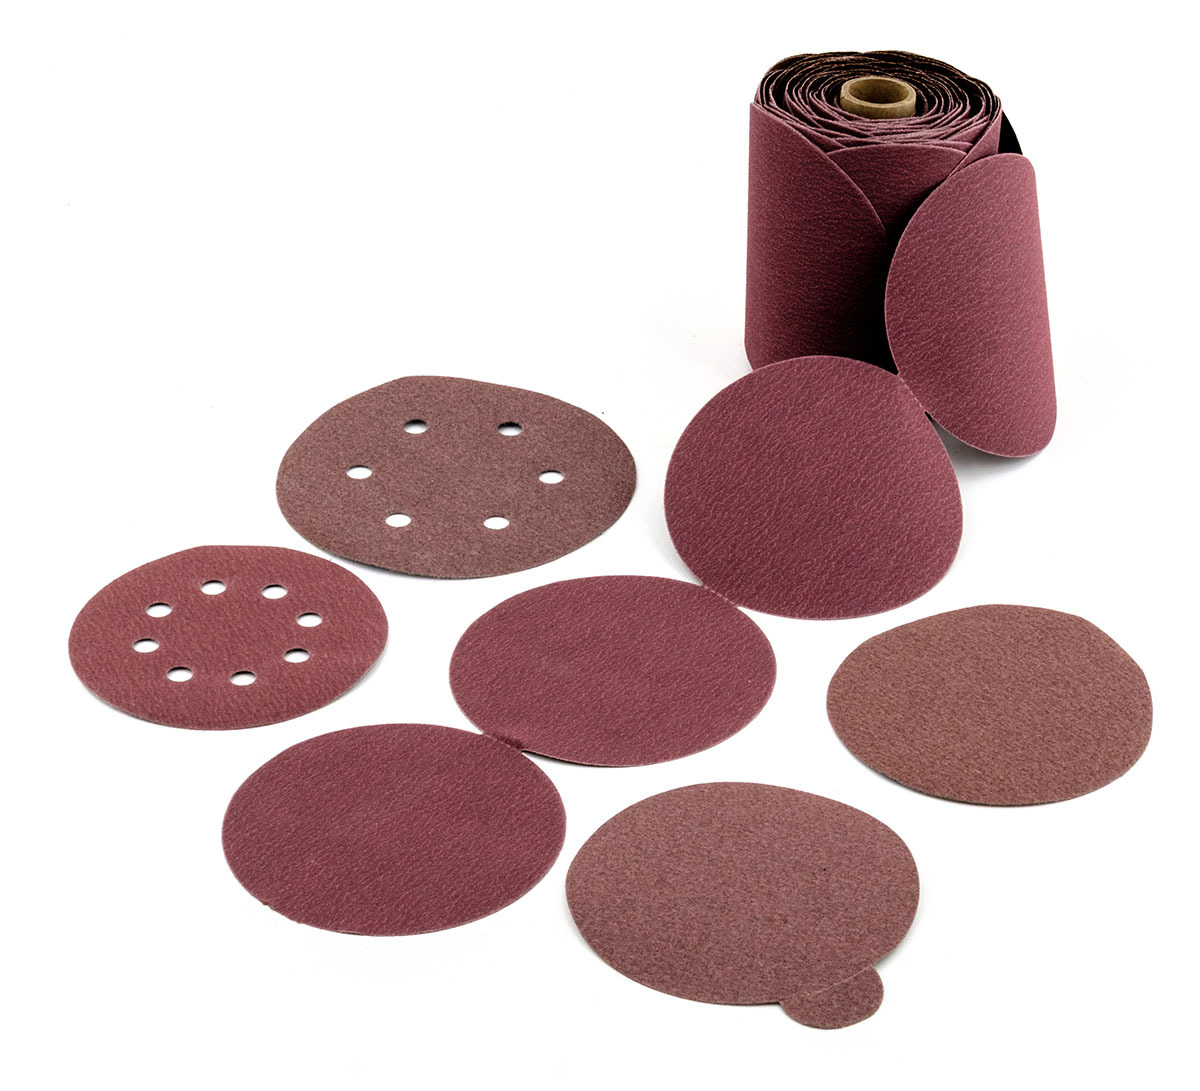 3S Stearated Aluminum Oxide Paper Discs